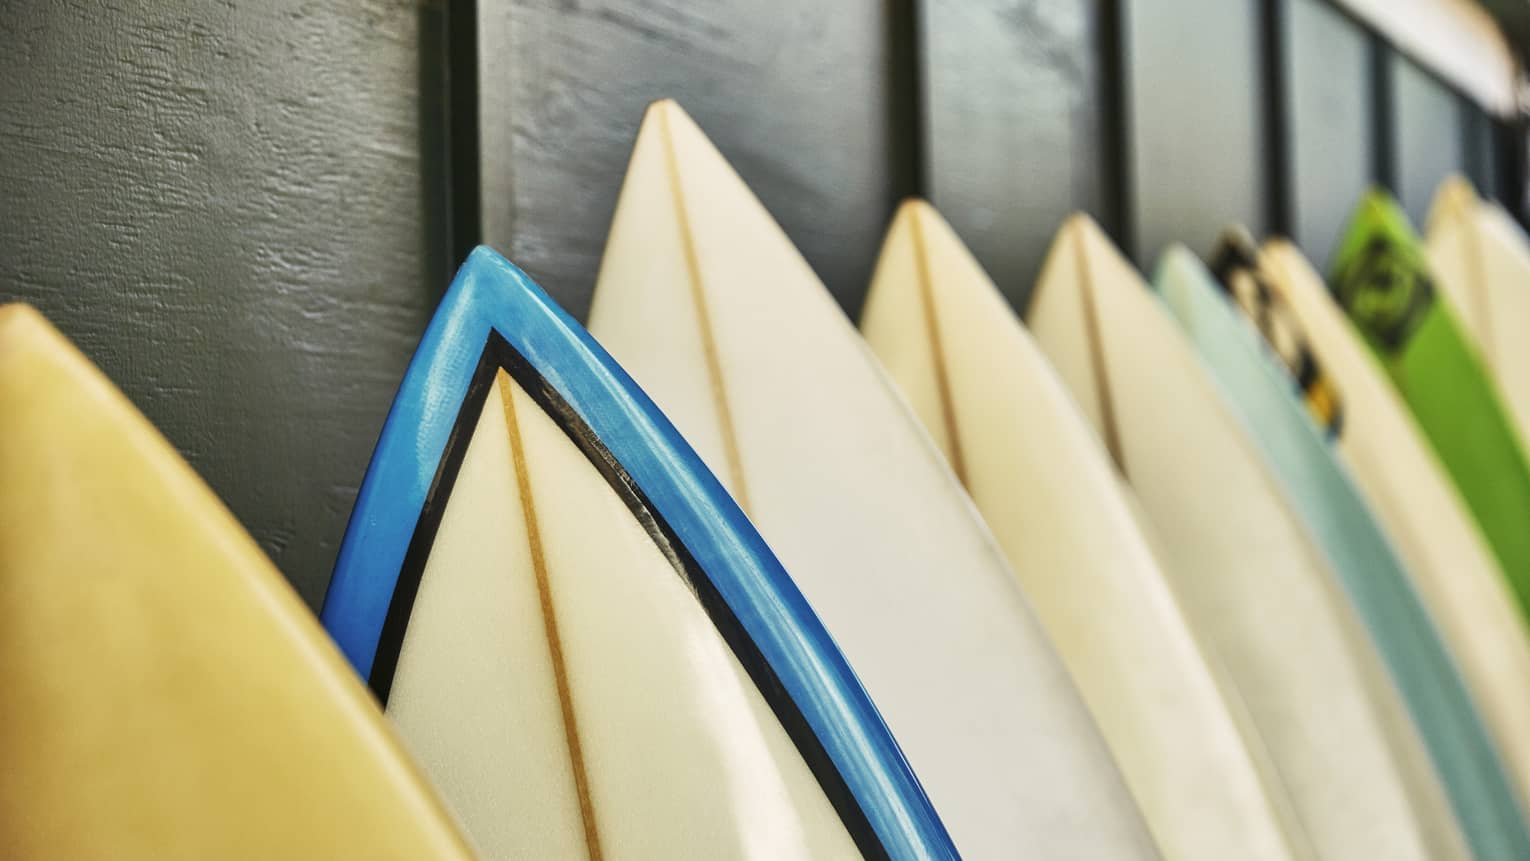 Close-up of the pointed tips of surfboards. All in the row, the upright boards lean against a dark board-and-batten wall.